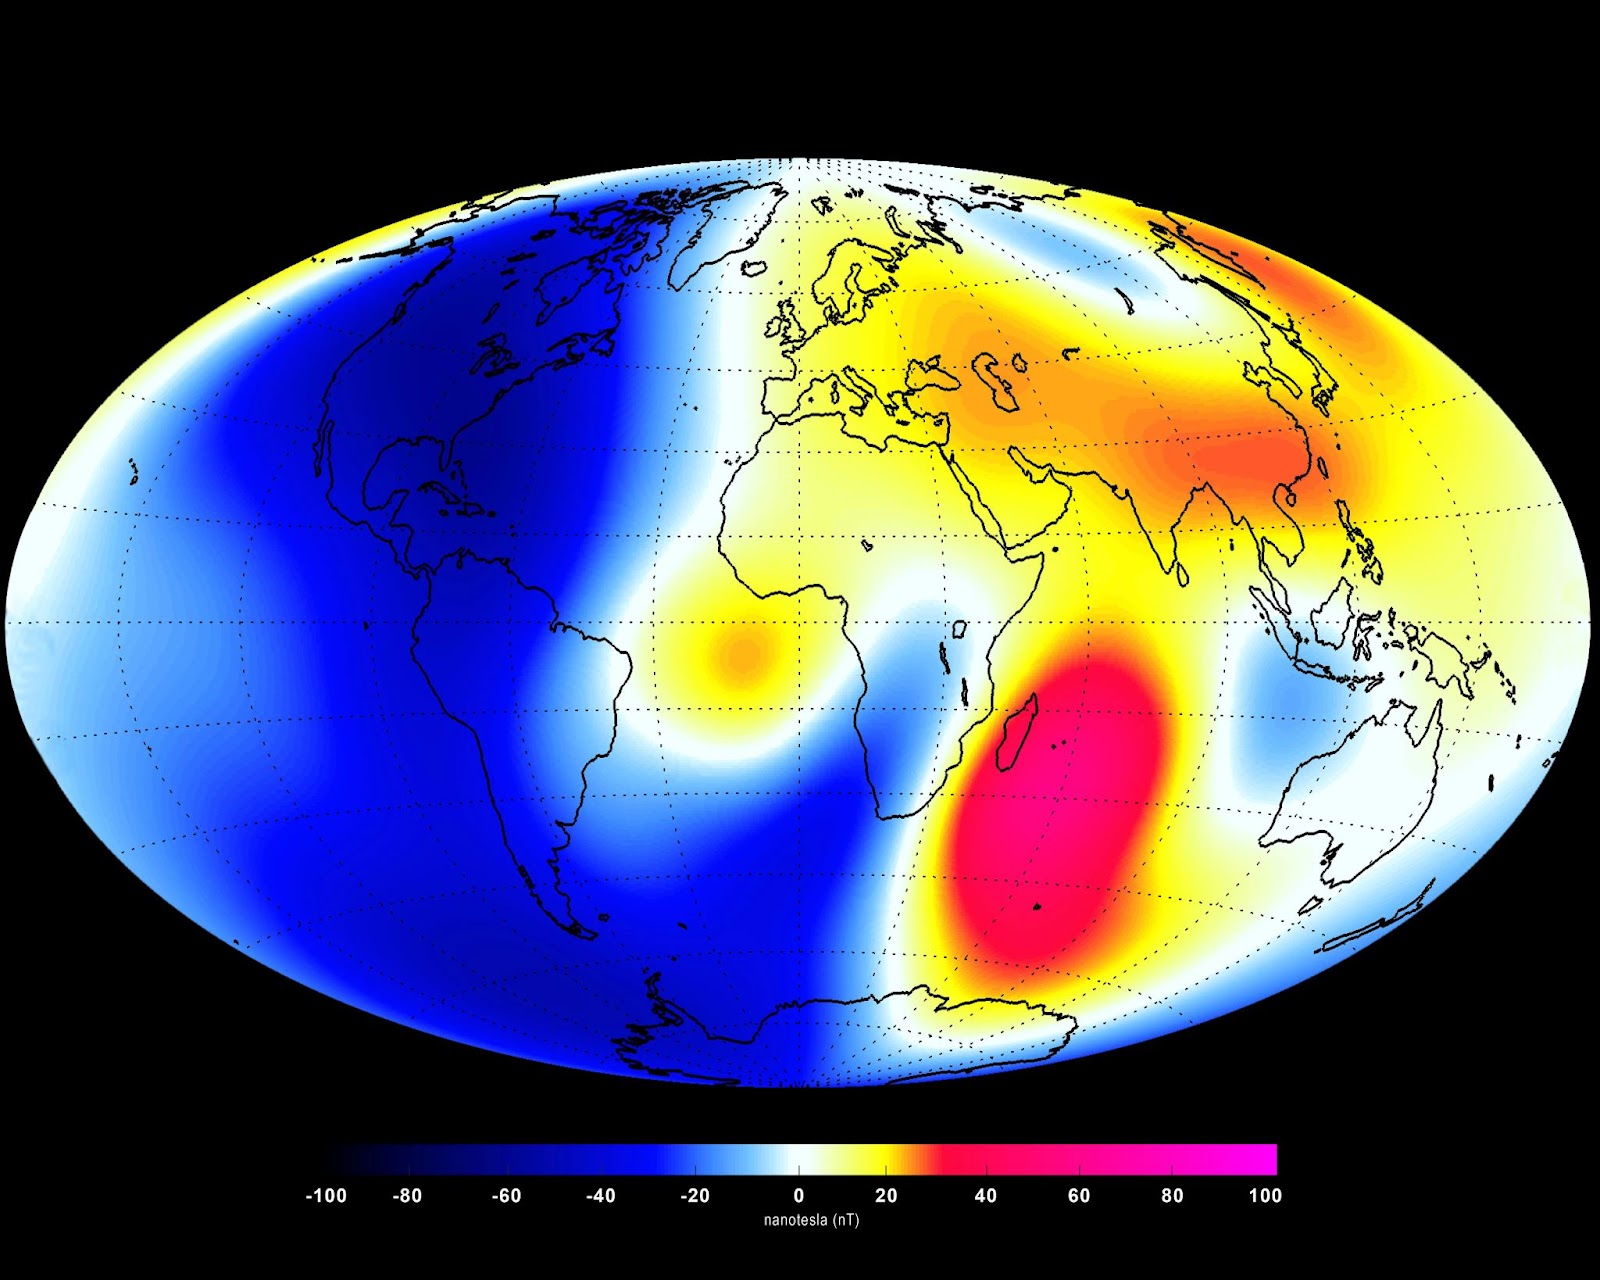 A heat map of Earth. A scale at the bottom in nanotesla, a unit of measurement for magnetic fields, denotes blue as areas where the magnetic field weakened and red as areas where the magnetic field strengthened. Madagascar and the Indian Ocean in dark red. China is light red and Asia as a whole is yellow. North and South America in dark blue. The rest of the map is white.